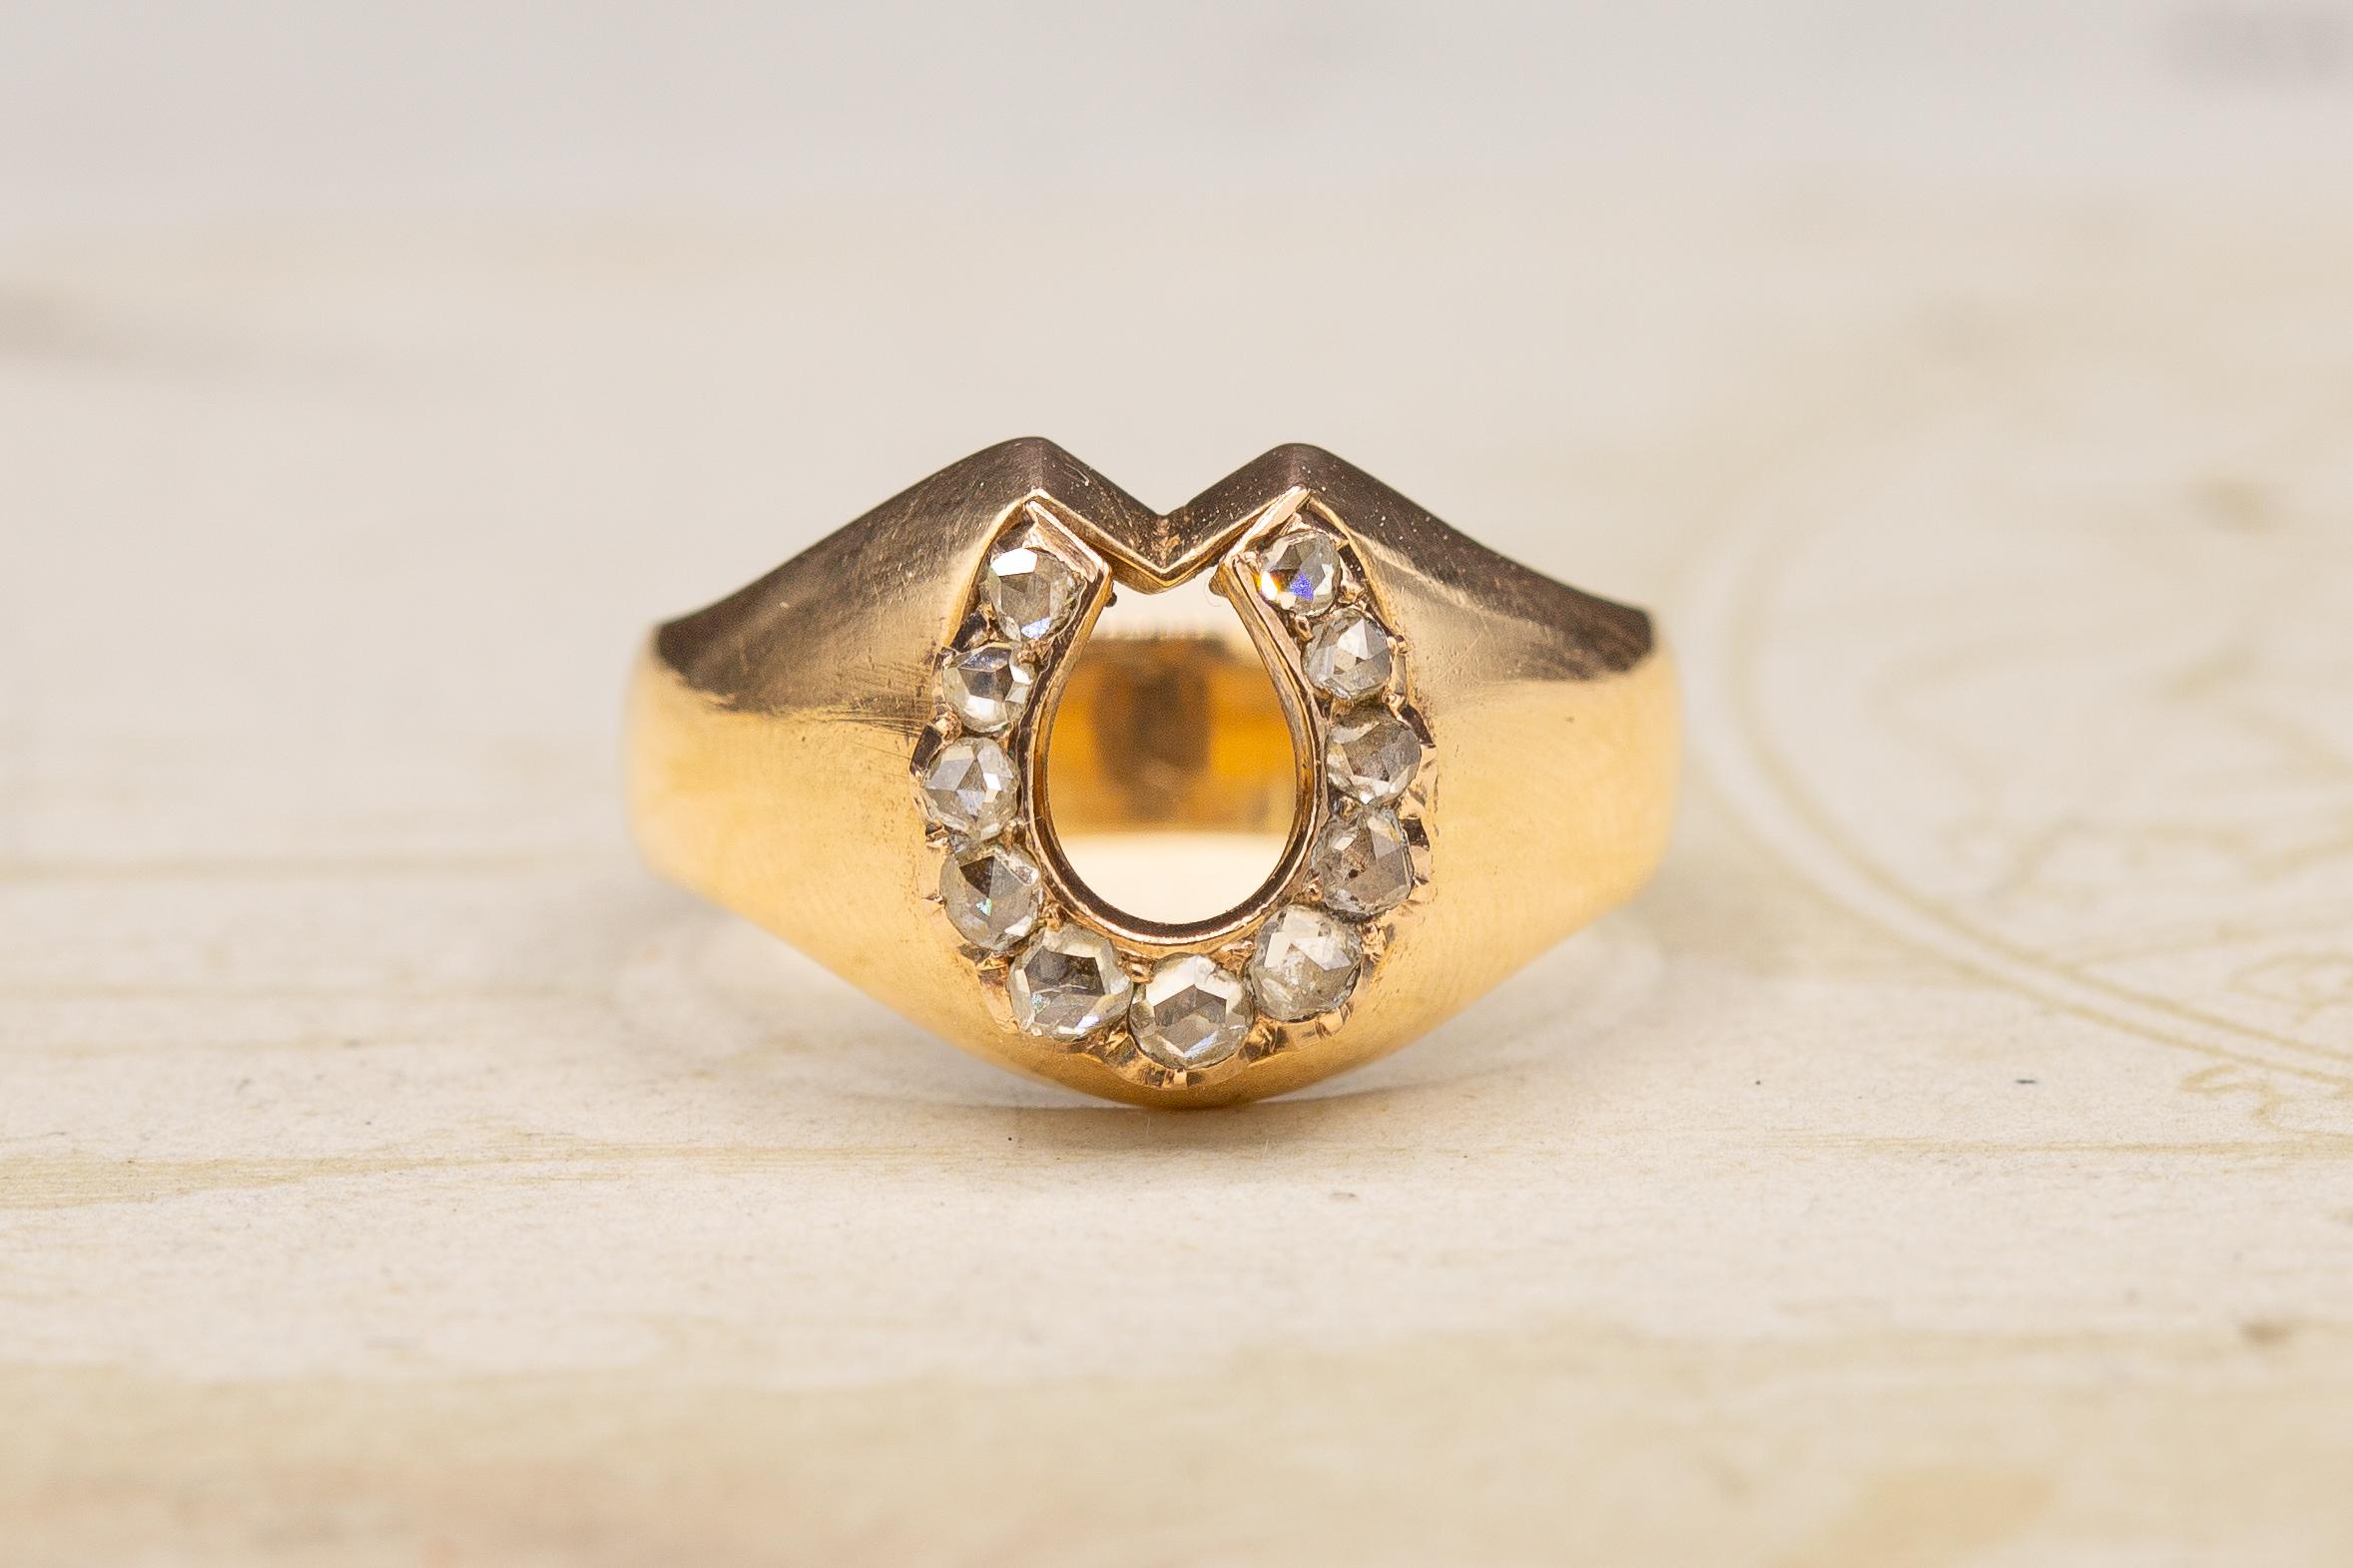 This antique Victorian era rose cut diamond horseshoe ring was made in Austro-Hungary, circa 1900. 

This utterly charming signet ring features a horseshoe motif at the front of the bezel. The motif has symbolised luck and fortune for centuries. The